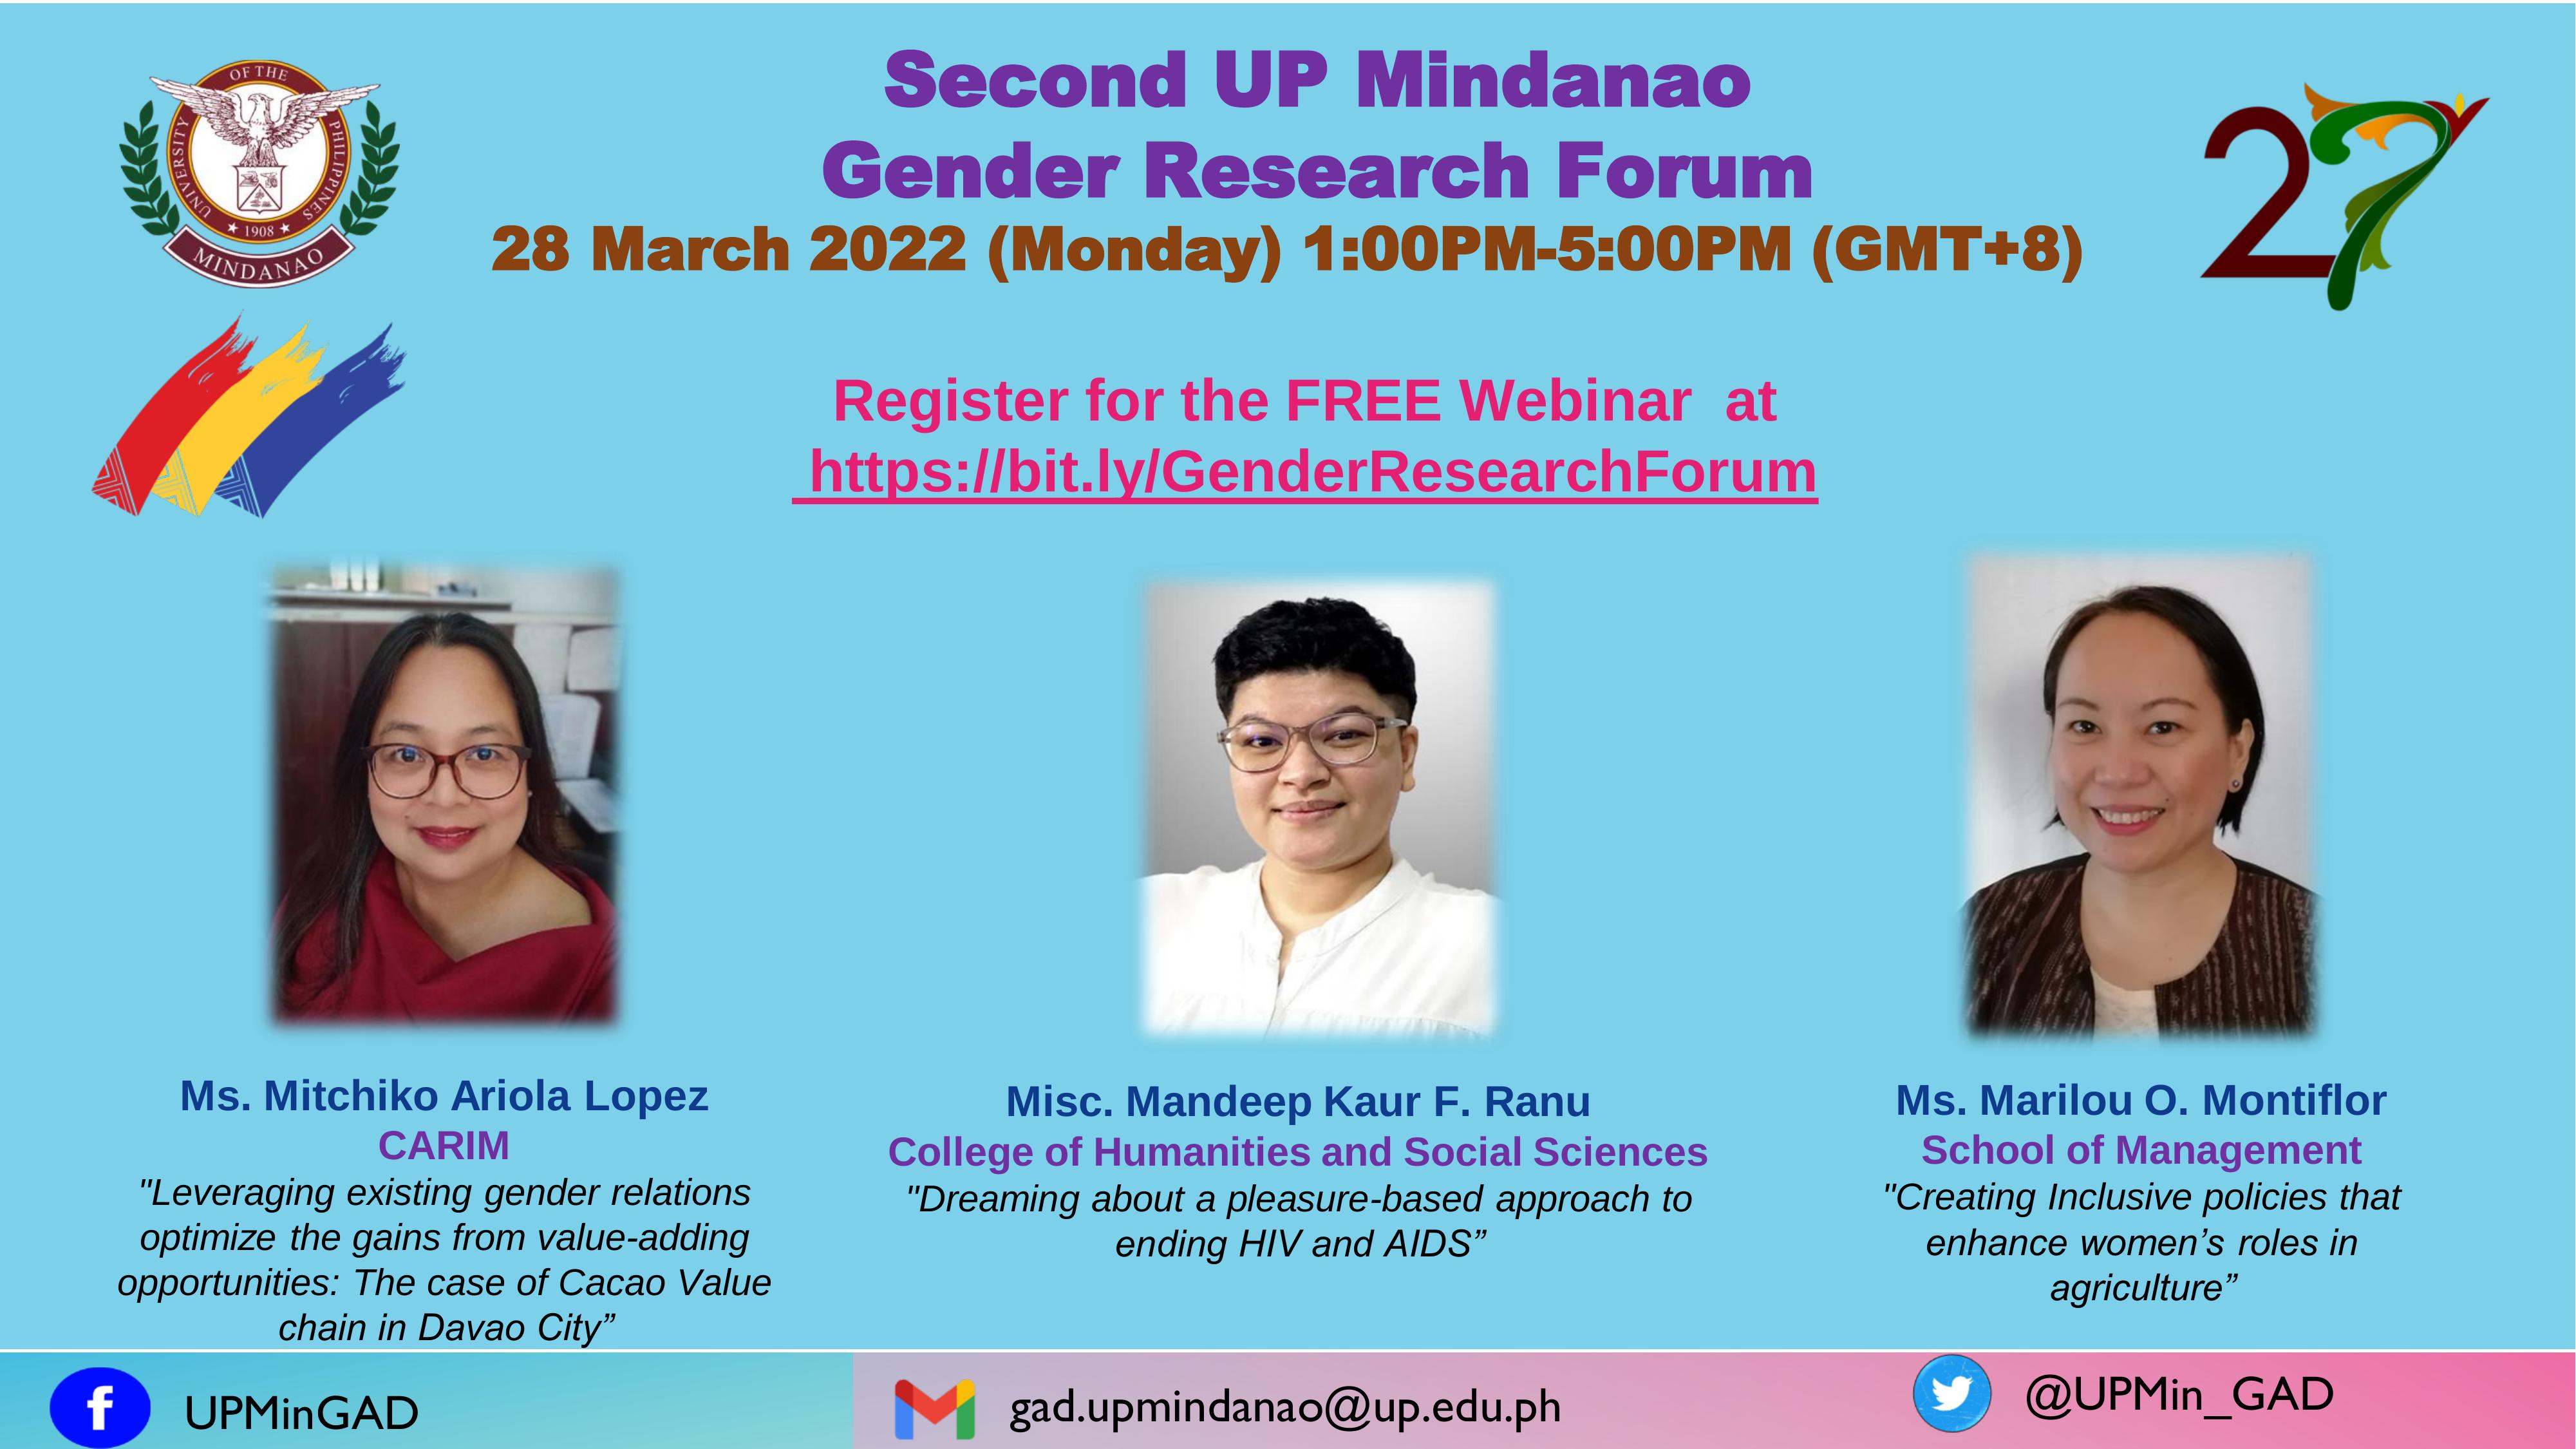 Second UP Mindanao Gender Research Forum